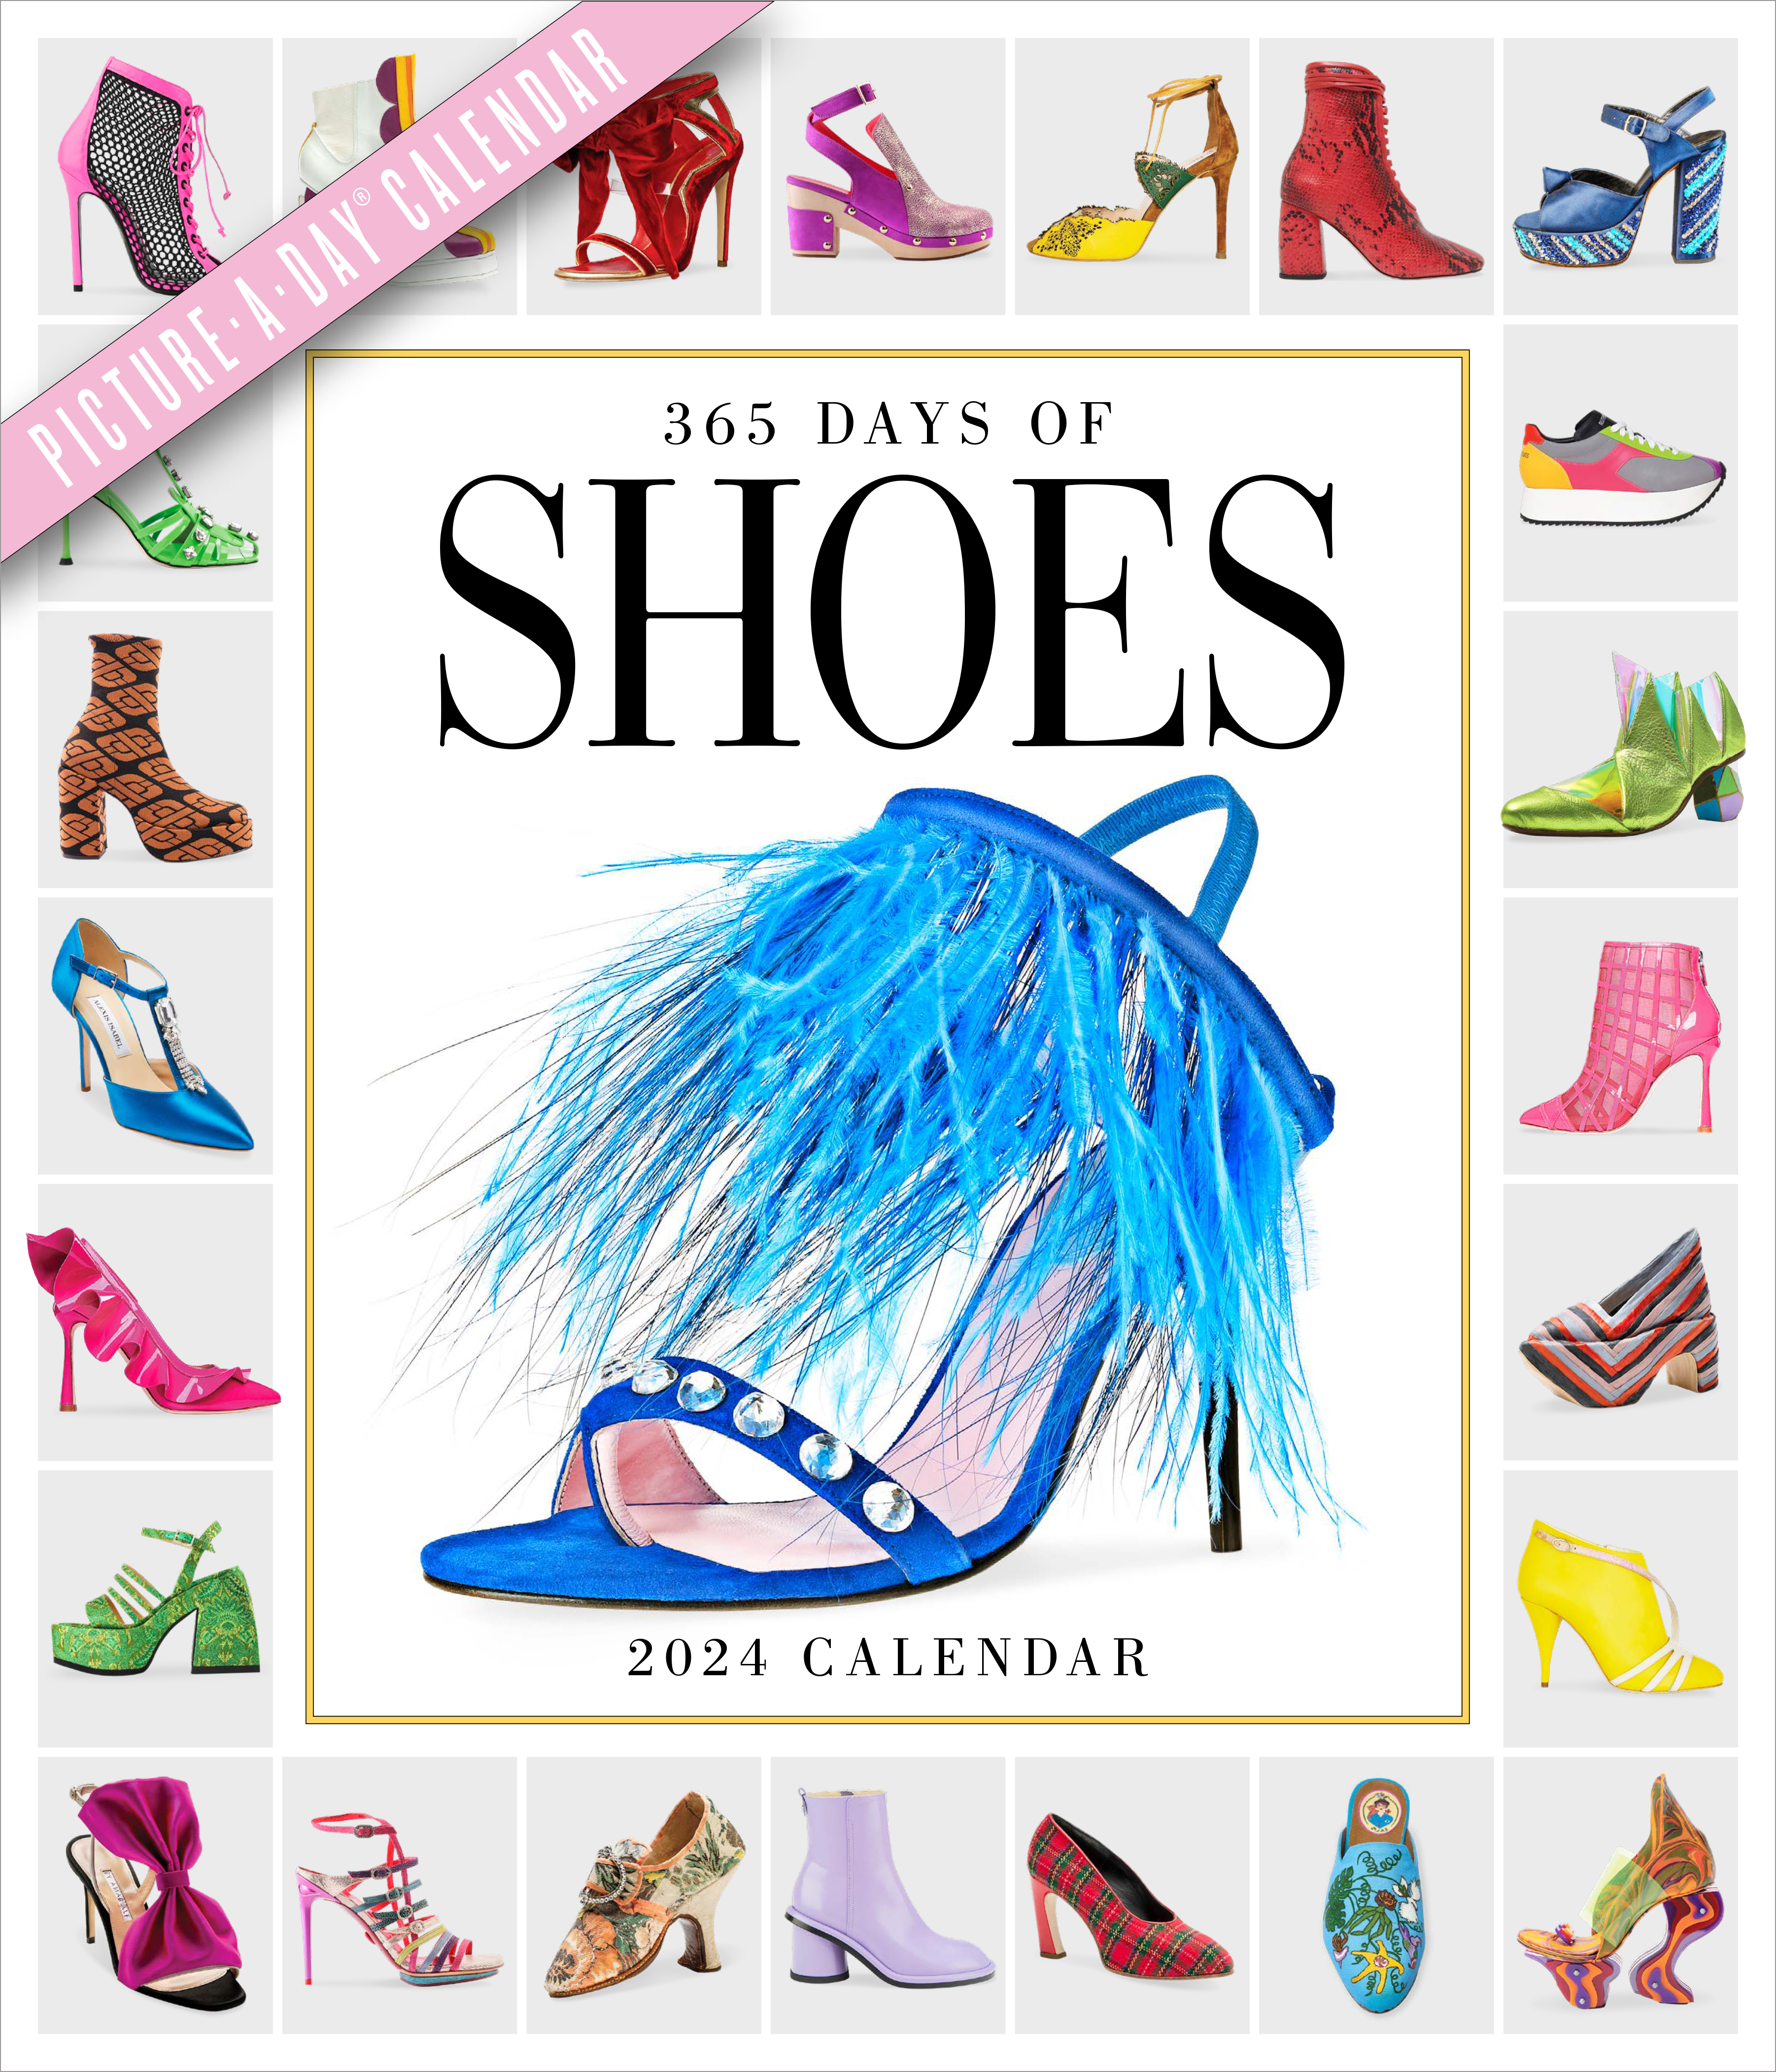 Shoes by Linda O'Keeffe | Hachette Book Group